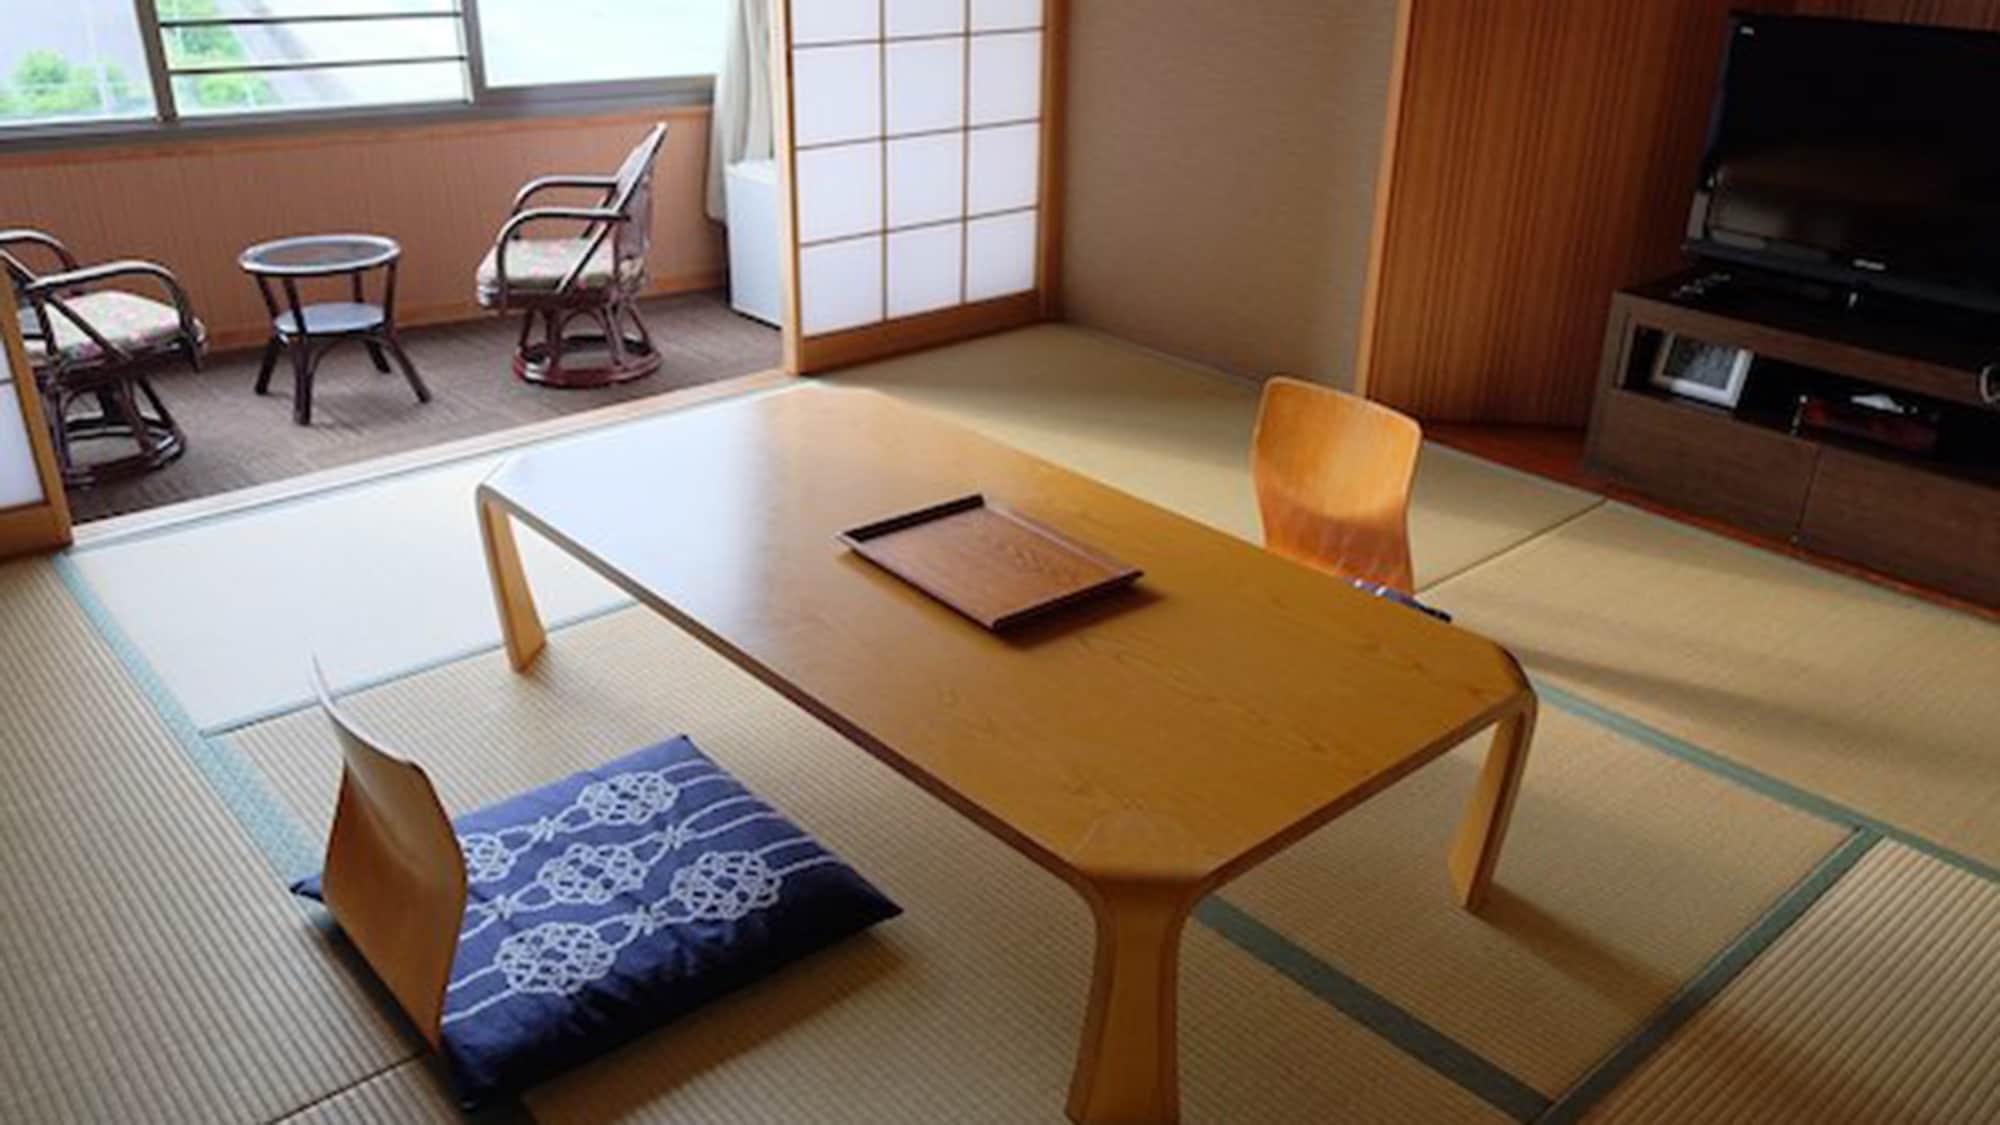 Japanese-style room 8-10 tatami mats: an example